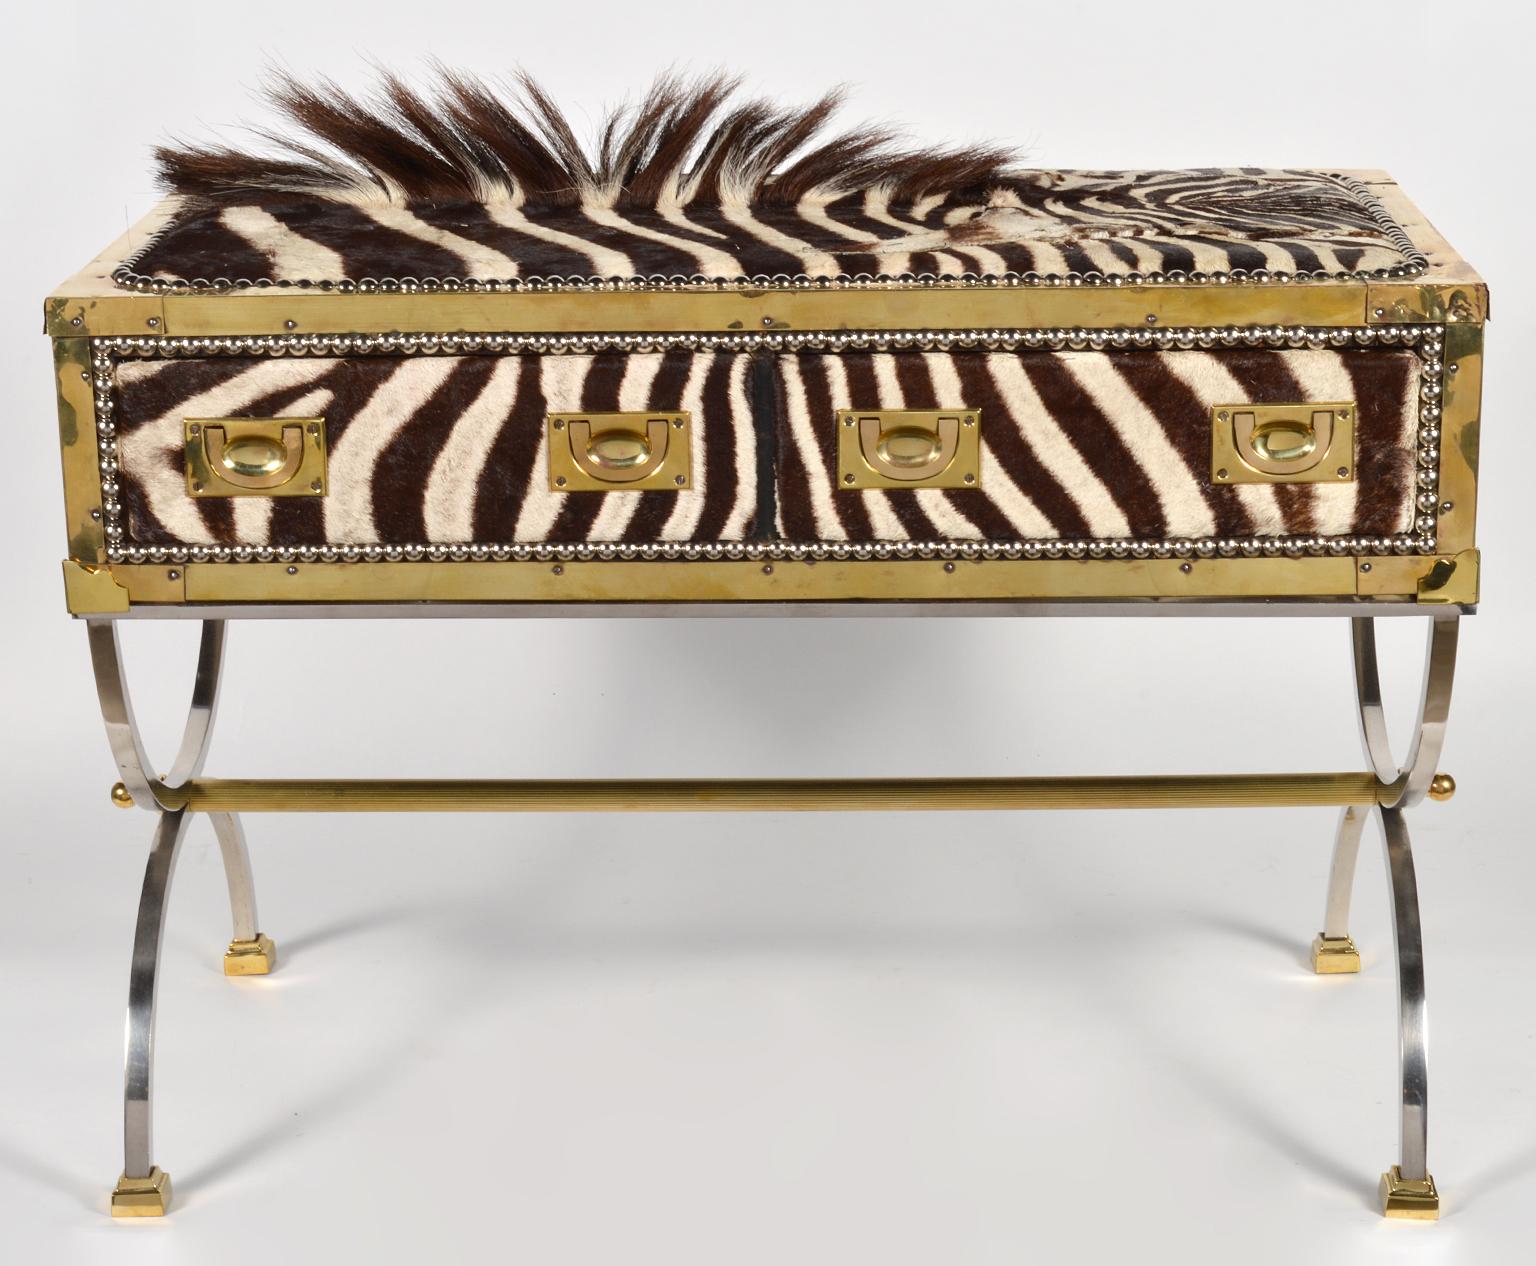 This eye-catching commode features a two drawer brass edged campaign style box or trunk covered with zebra skin on the front and top and with black leather on back and sides accented by steel nail head trim. It rests on a curule style finely